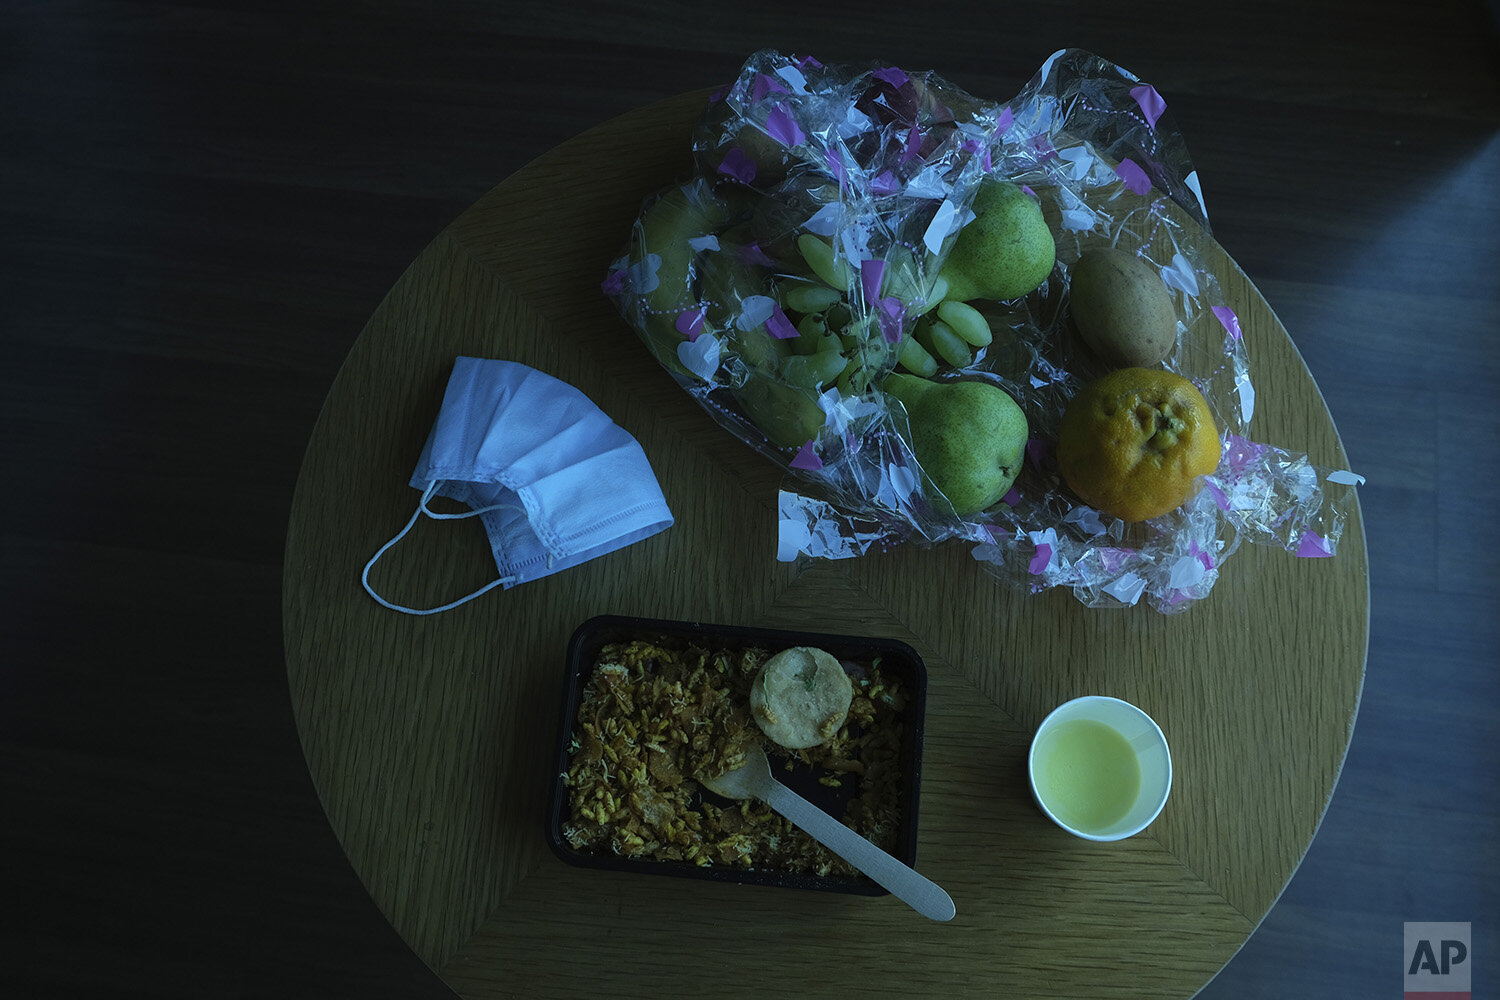  In this April 23, 2020, photo, a mask lies along with food on a table in the hotel room of Associated Press photographer Rafiq Maqbool where he was quarantined in Mumbai, India. Maqbool was tested positive for COVID-19 with dozens of other journalis